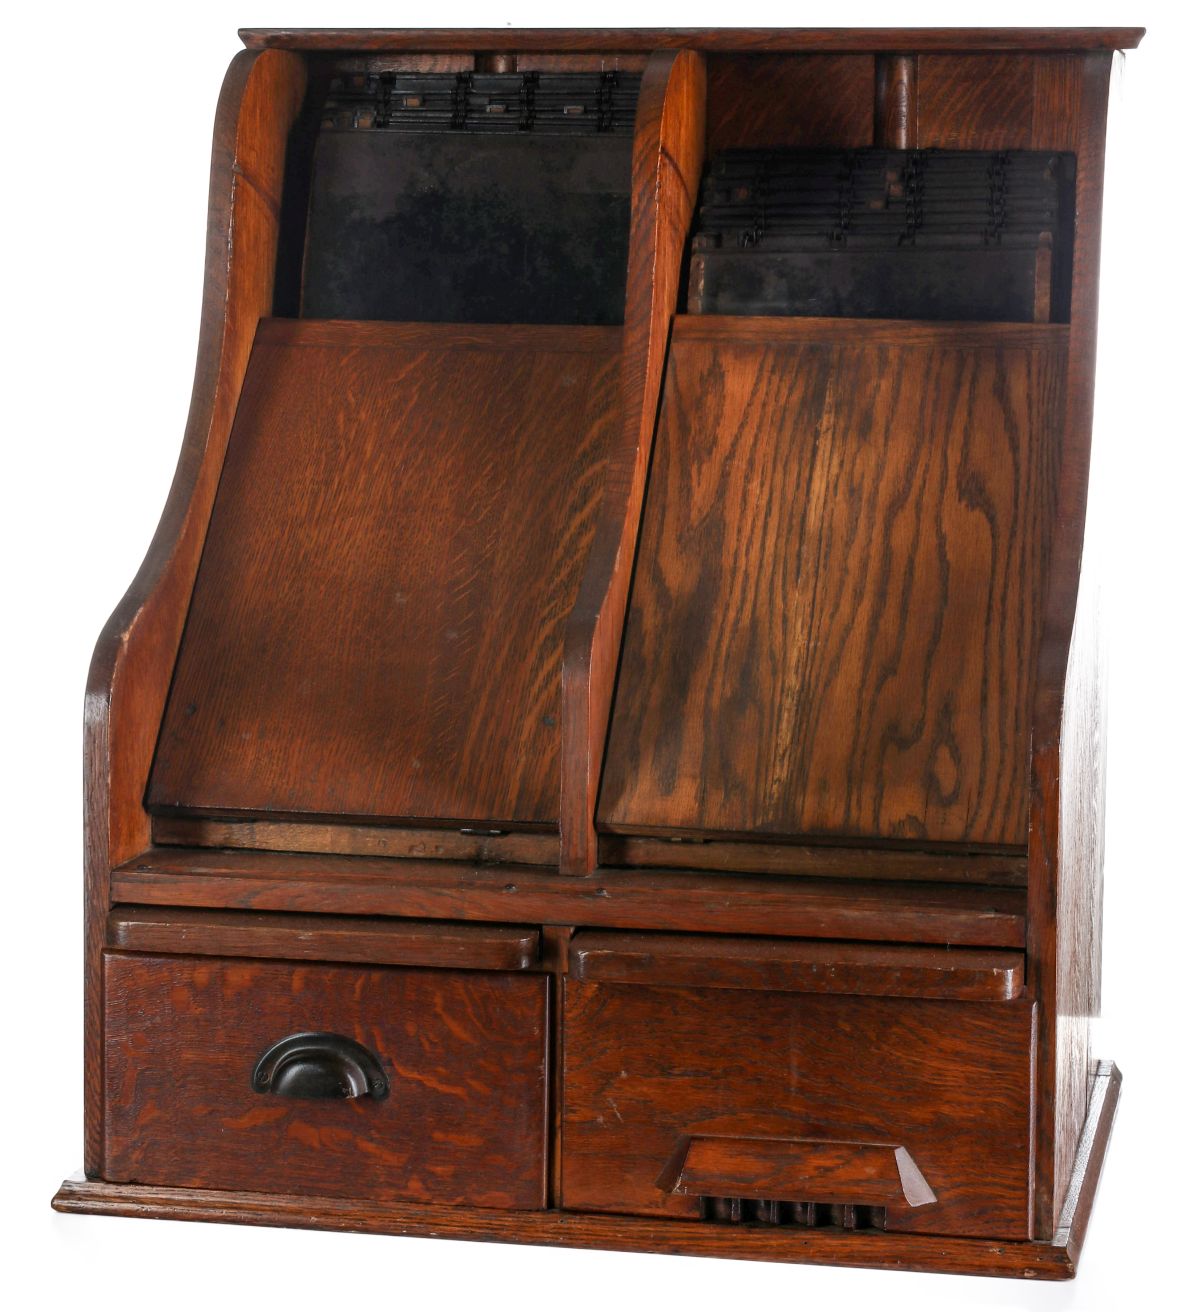 A TIGERED OAK COUNTER-TOP ACCOUNTING SYSTEM CIRCA 1880